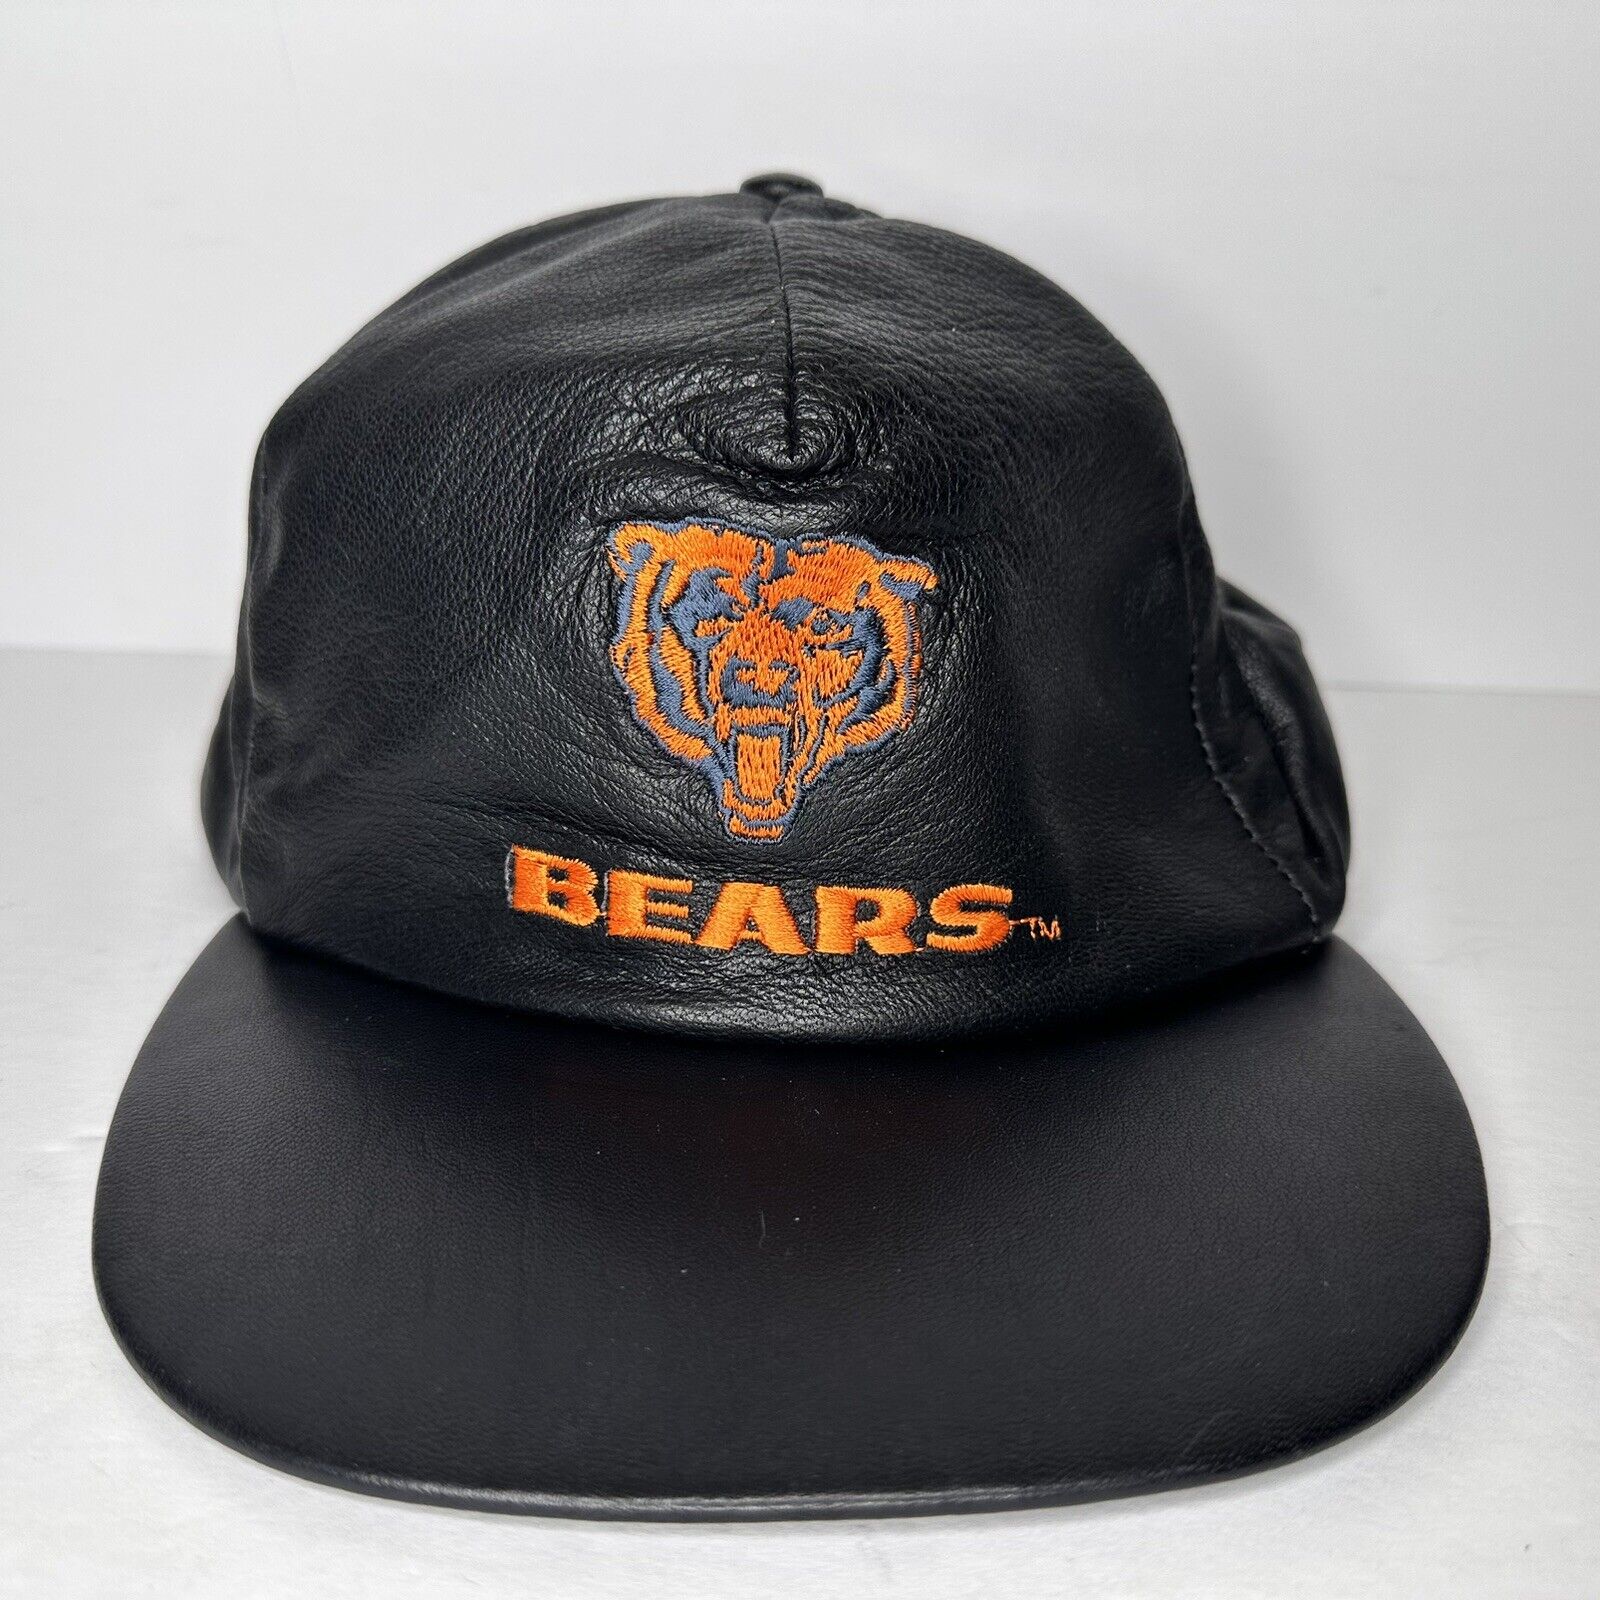 Vintage 90s Chicago Bears Leather Snapback Hat - NFL Football Cap by Cali Fame - TreasuTiques